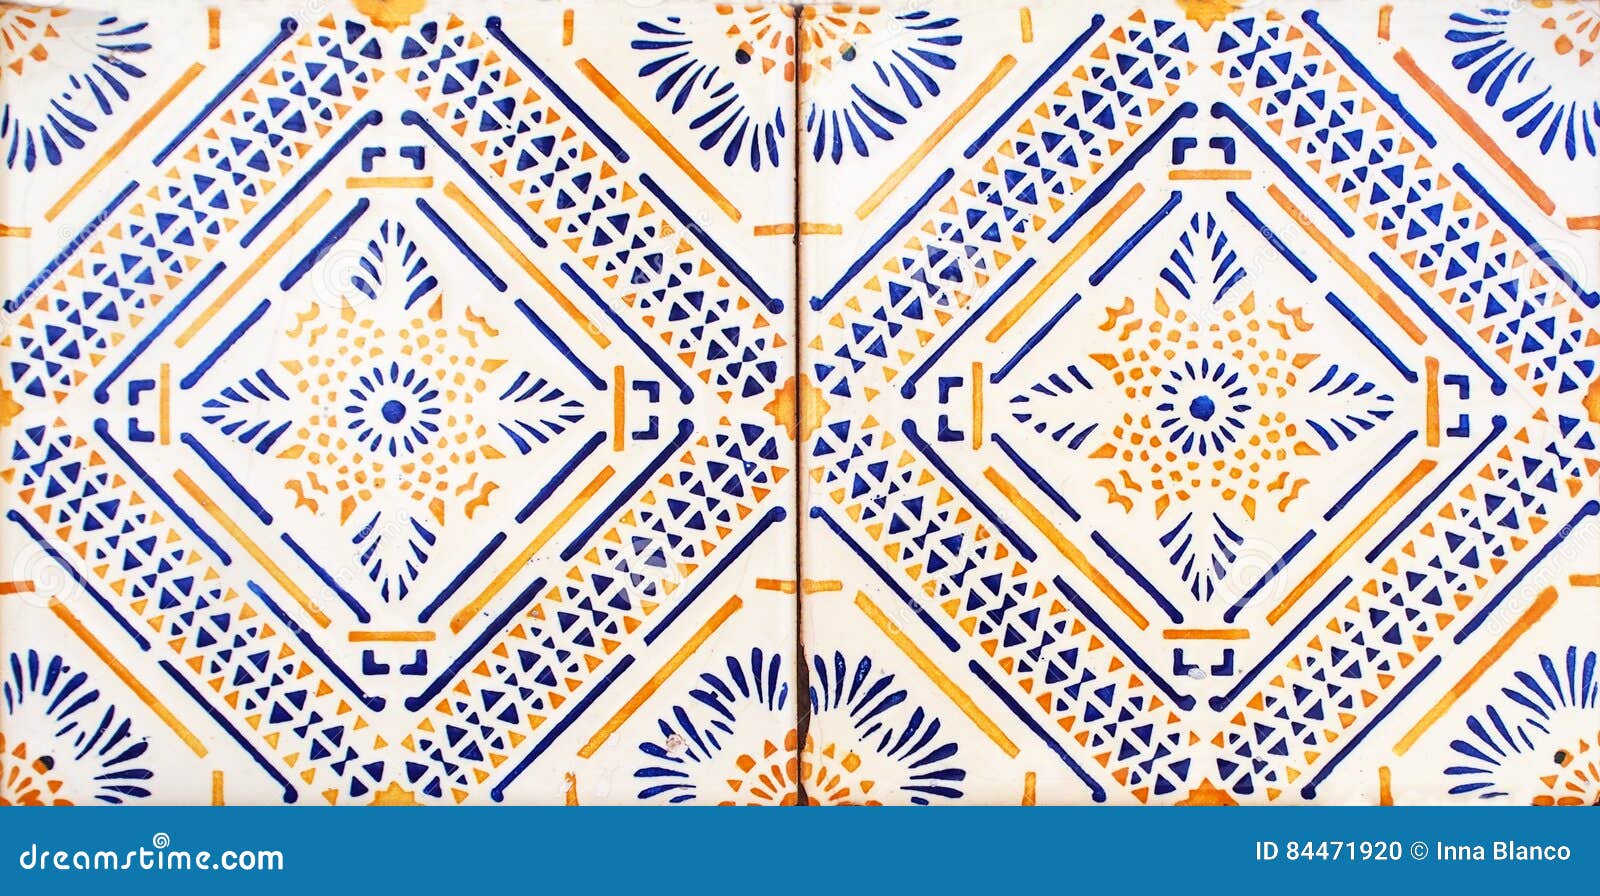 detail of the traditional tiles from facade of old house. decorative tiles.valencian traditional tiles. floral ornament. majolica,